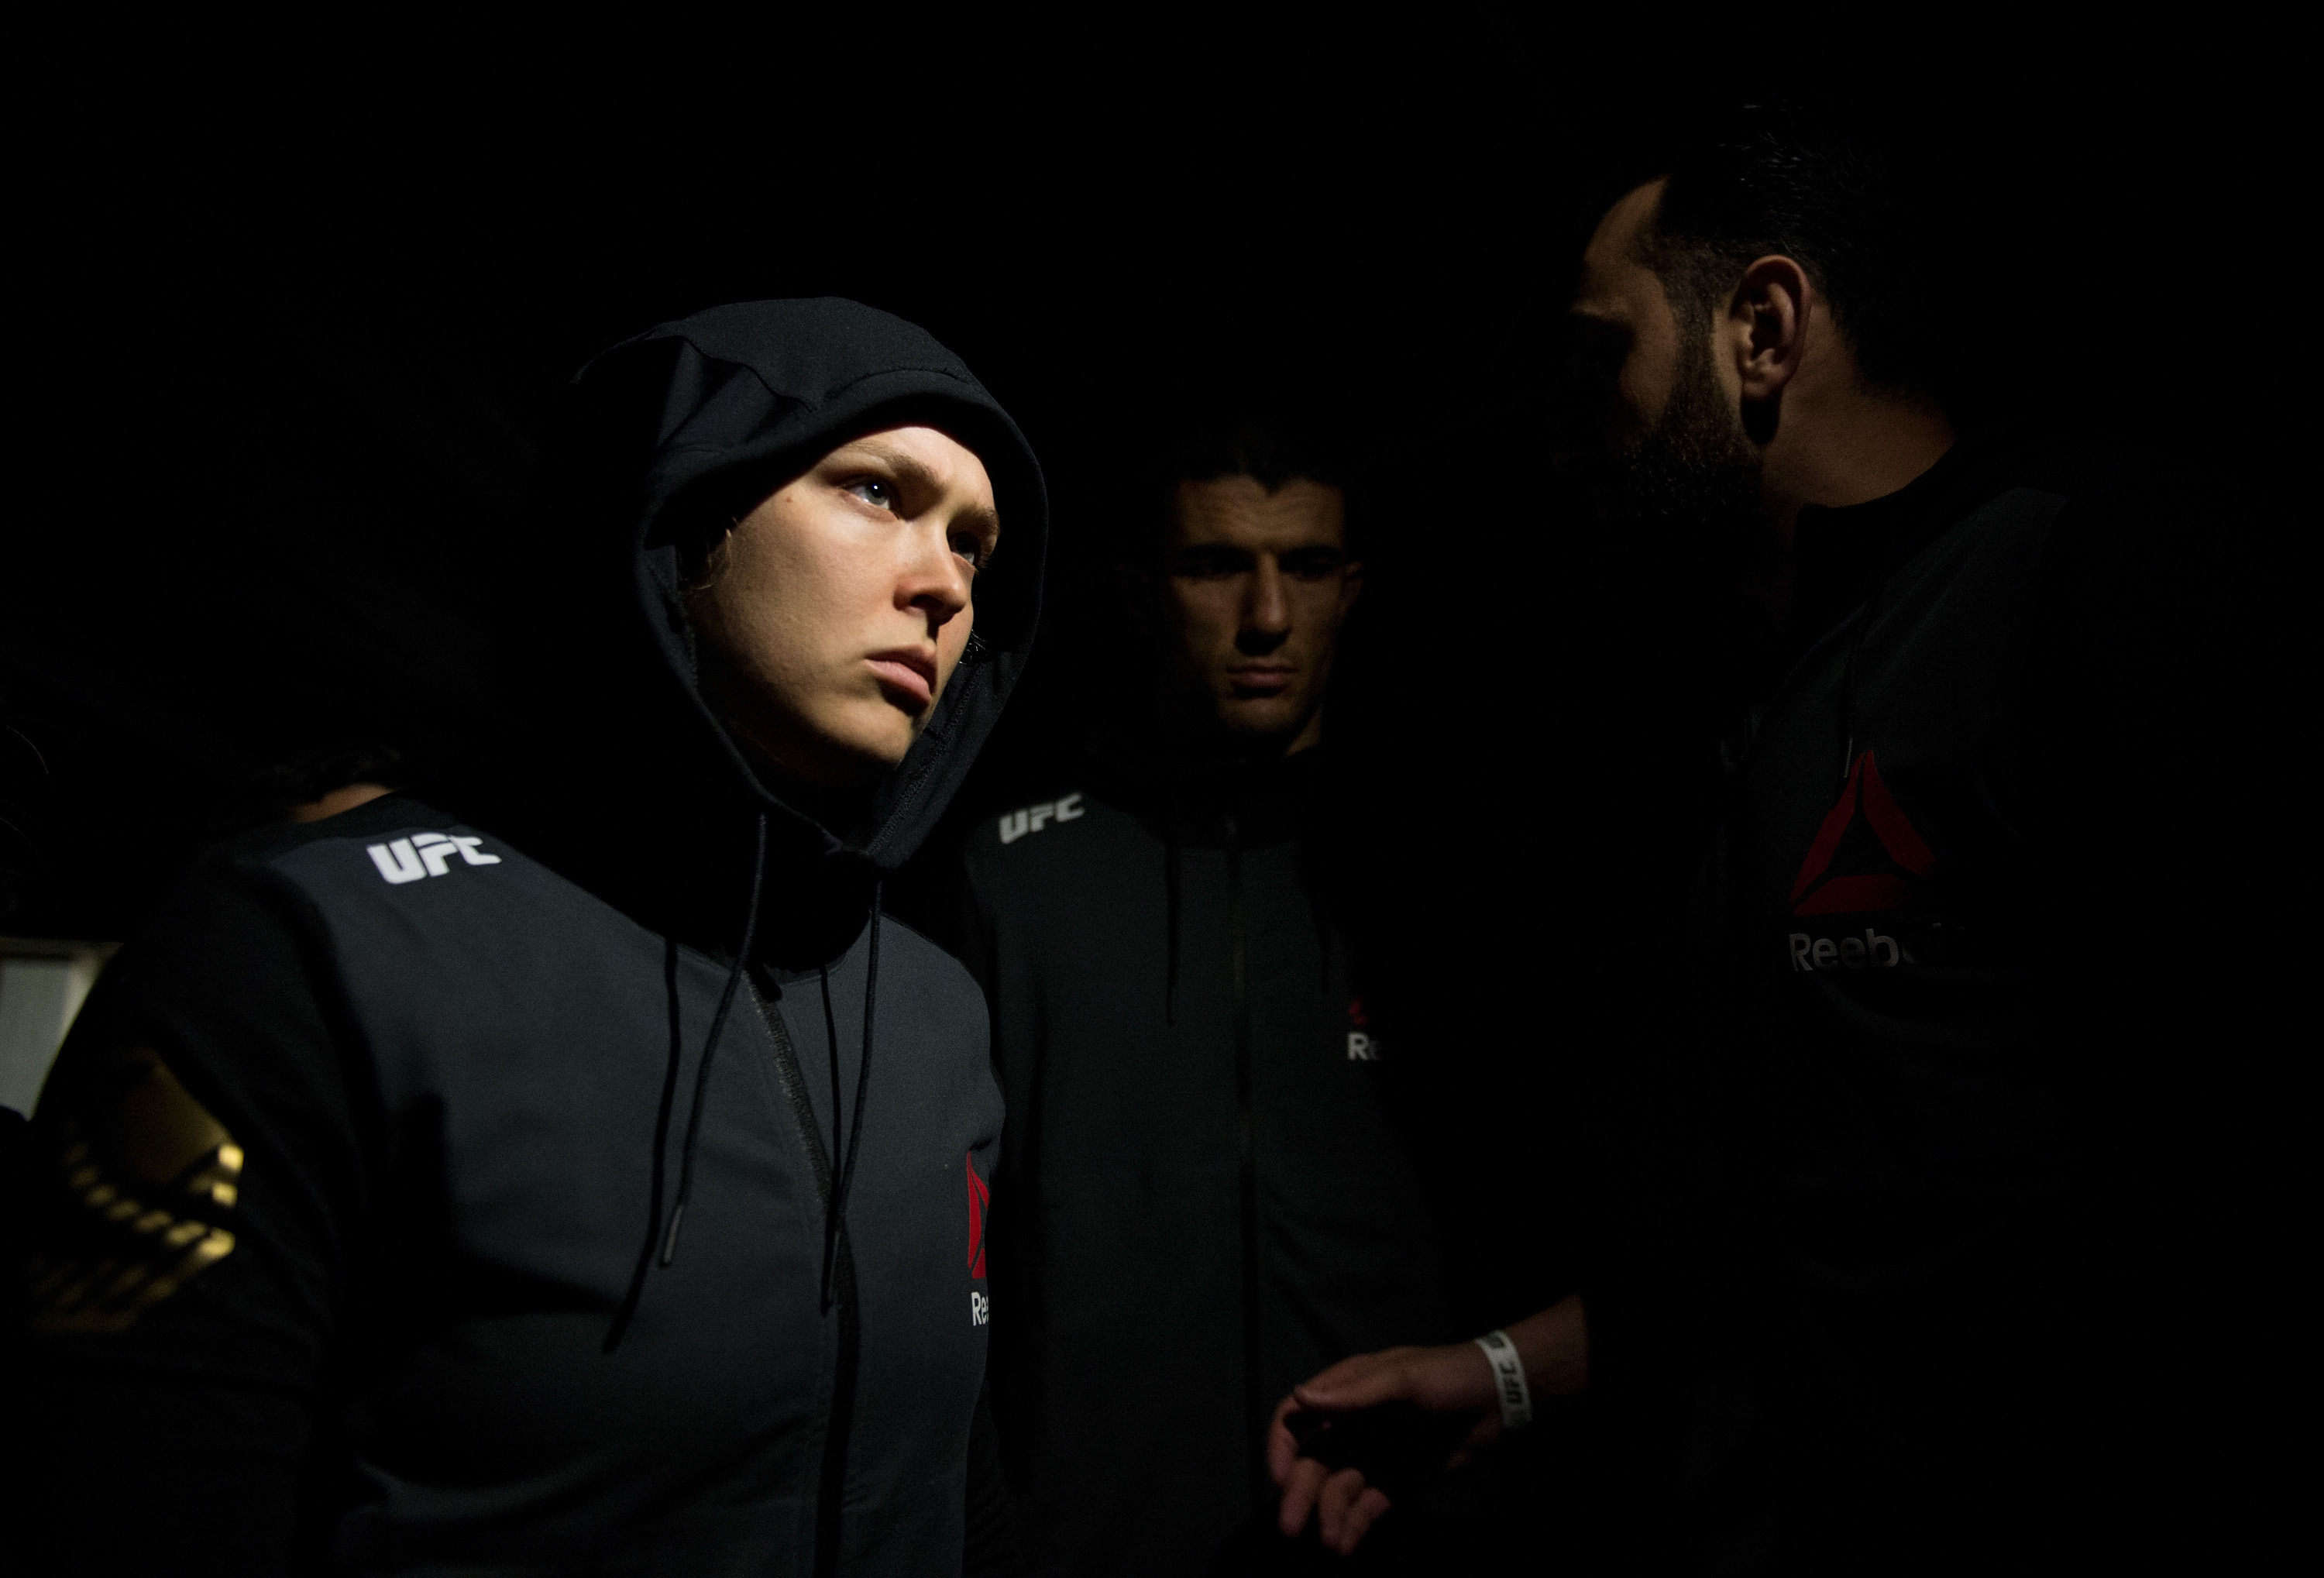 Ronda Rousey prepares to enter the Octagon before facing Holly Holm in their UFC women's bantamweight championship bout during the UFC 193 event at Etihad Stadium in Melbourne, Australia, on Nov. 15, 2015 (Brandon Magnus/—Zuffa LLC via Getty Images)